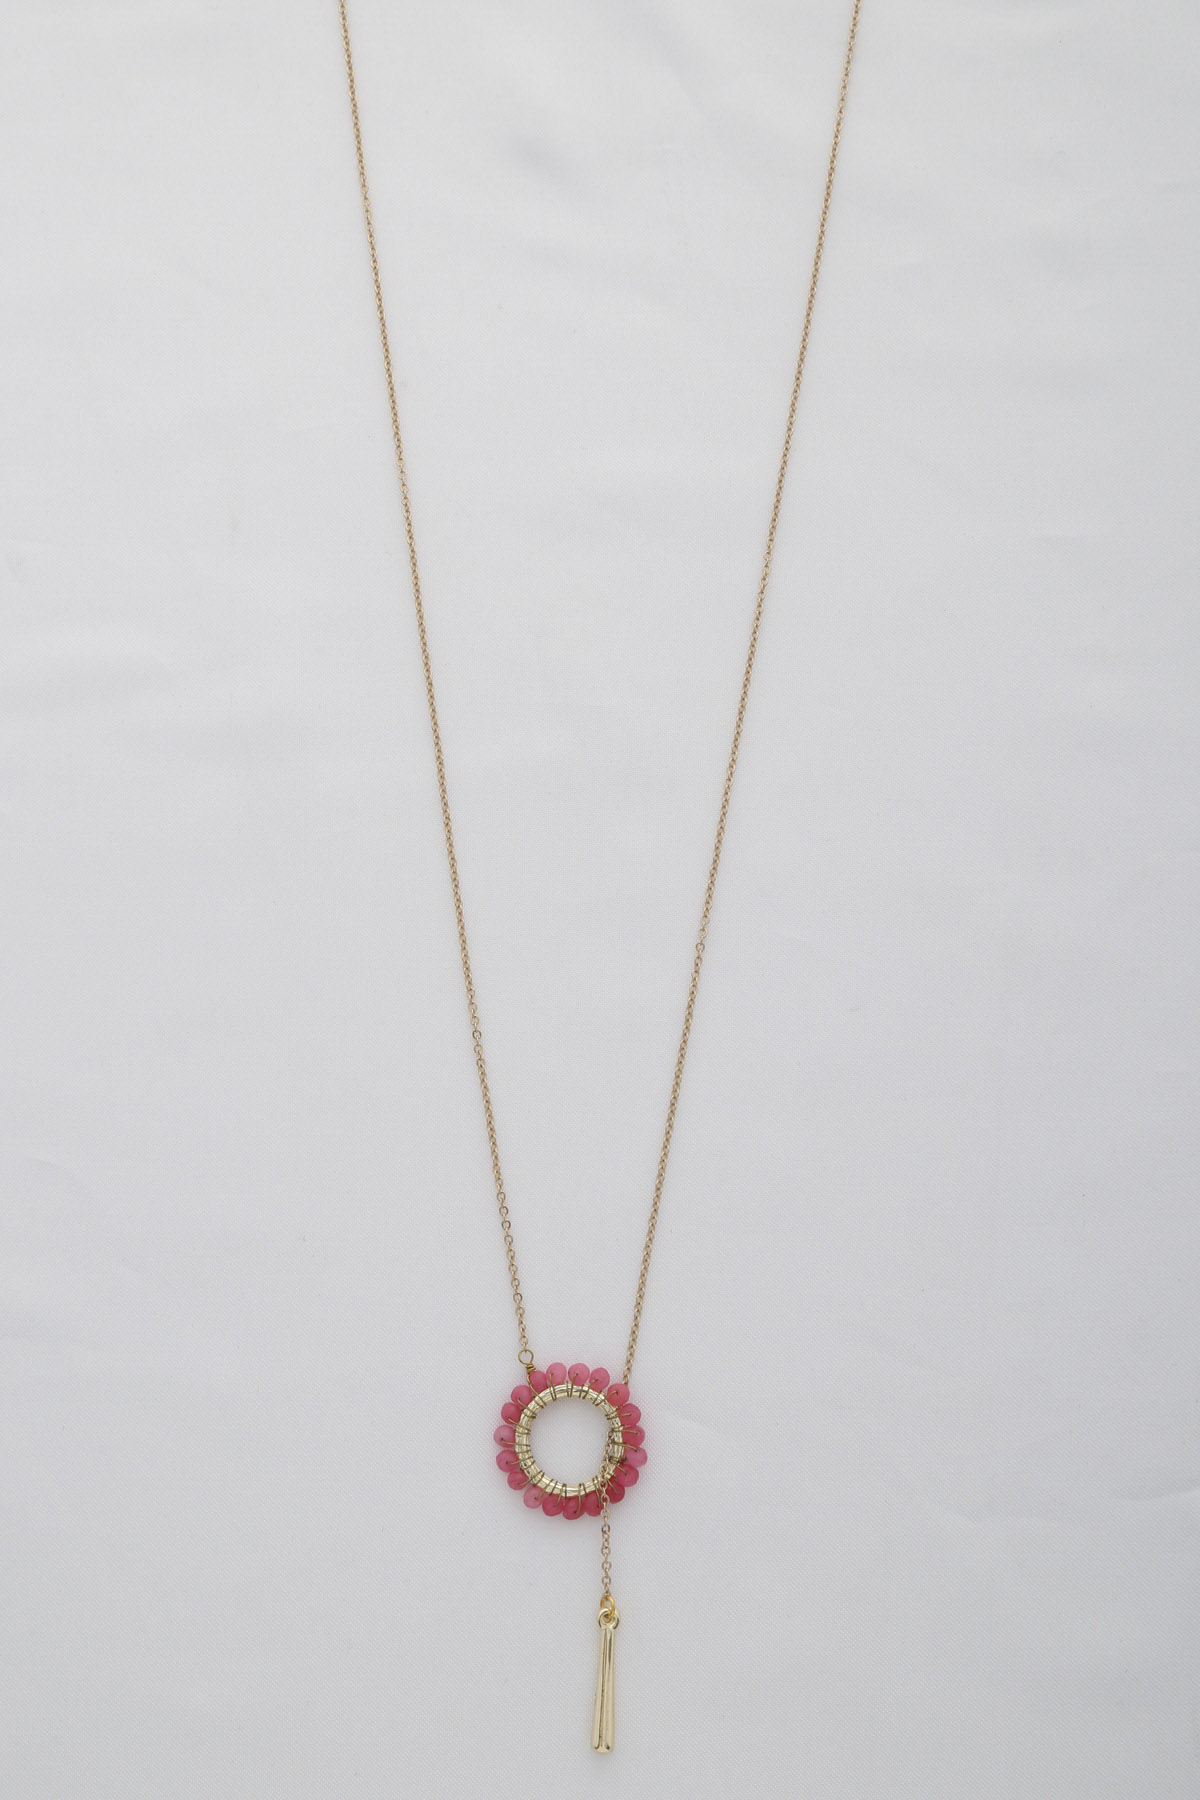 ROUND BEADED PULL THROUGH NECKLACE